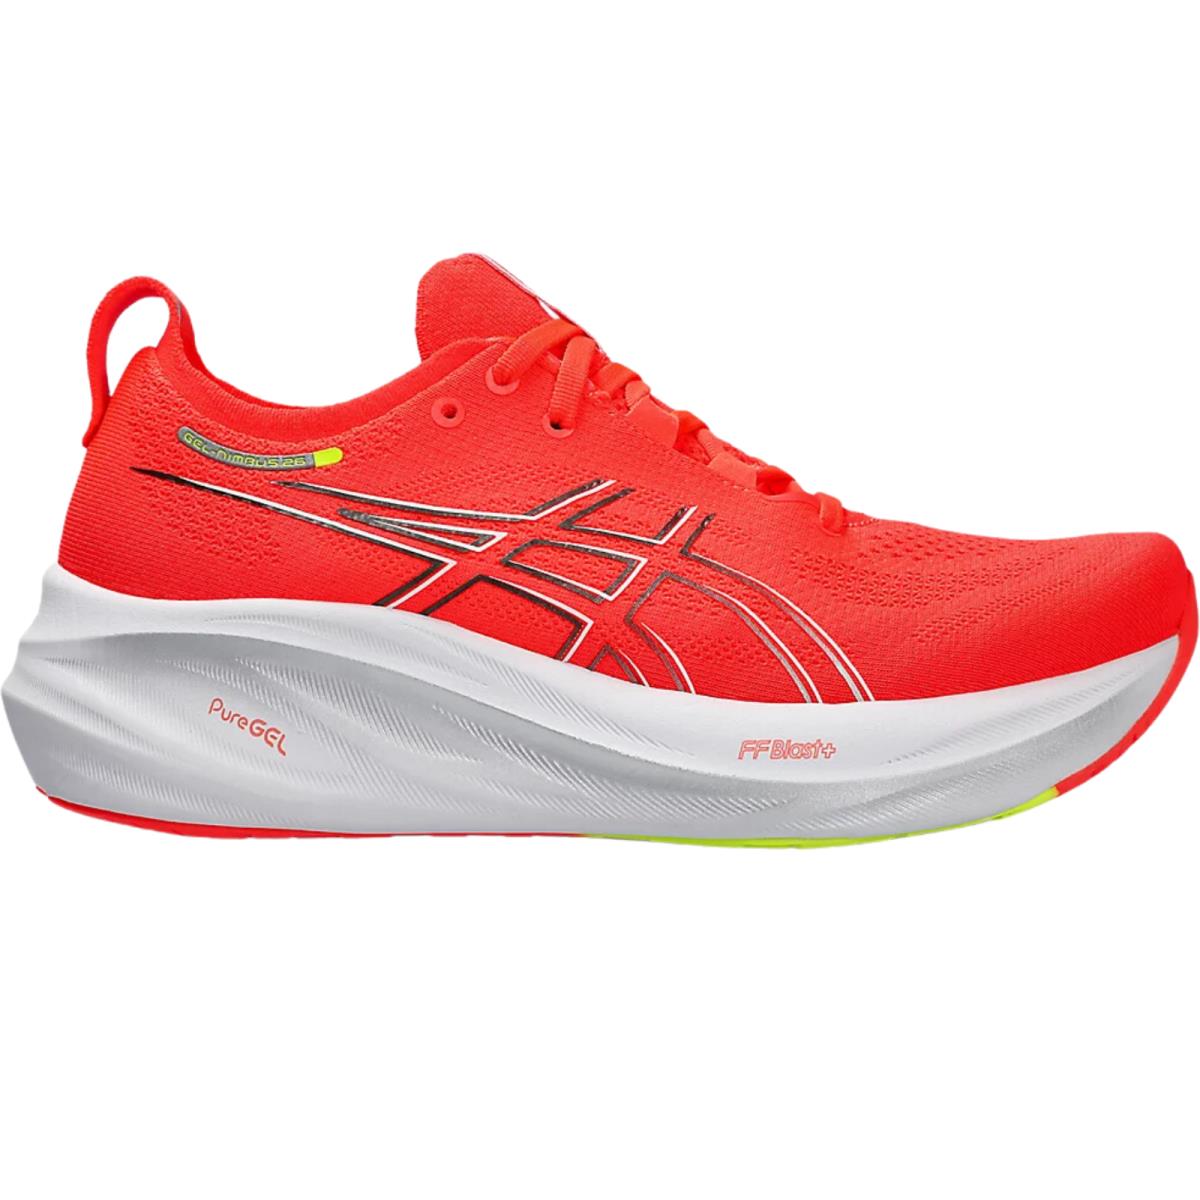 Asics Gel-nimbus 26 Women`s Running Shoes All Color US Sizes 6-11 Sunrise Red/Pure Silver